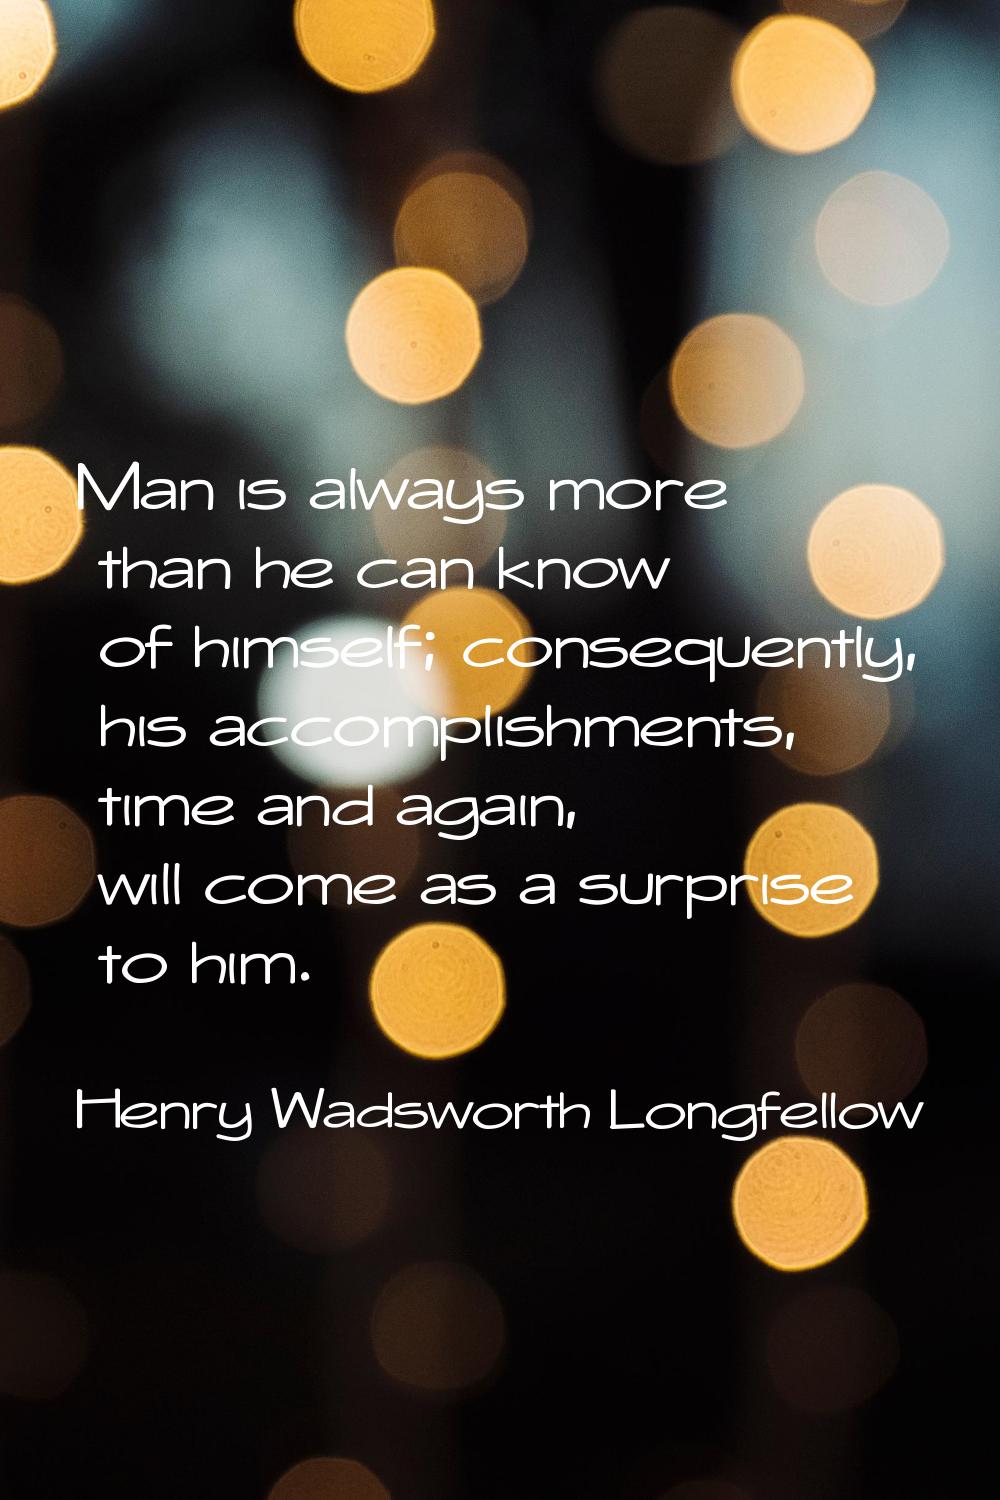 Man is always more than he can know of himself; consequently, his accomplishments, time and again, 